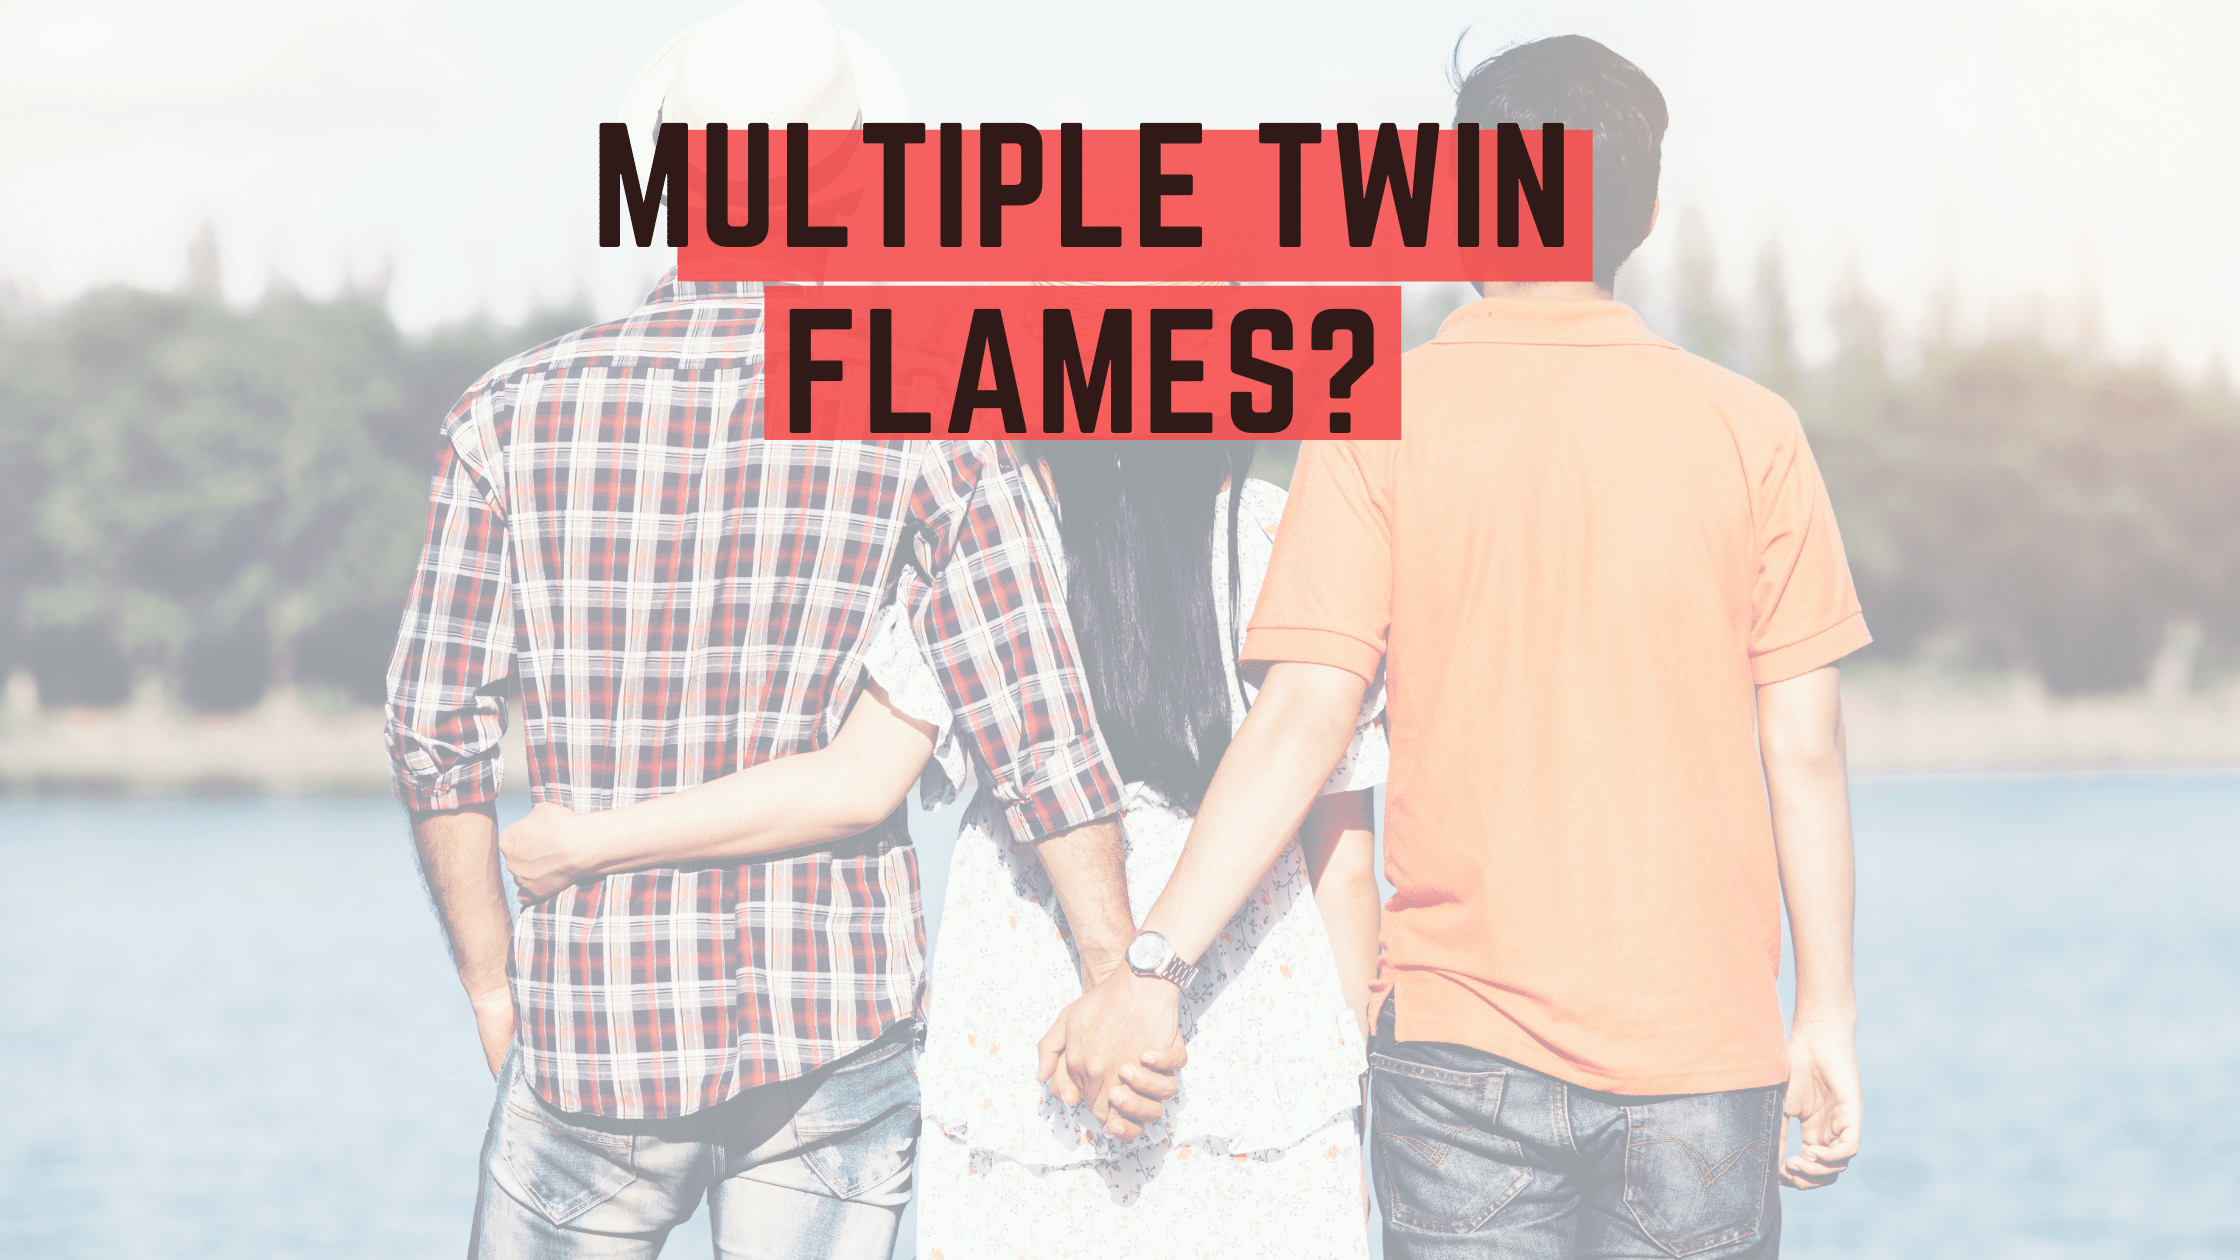 Can You Have More than One Twin Flame?